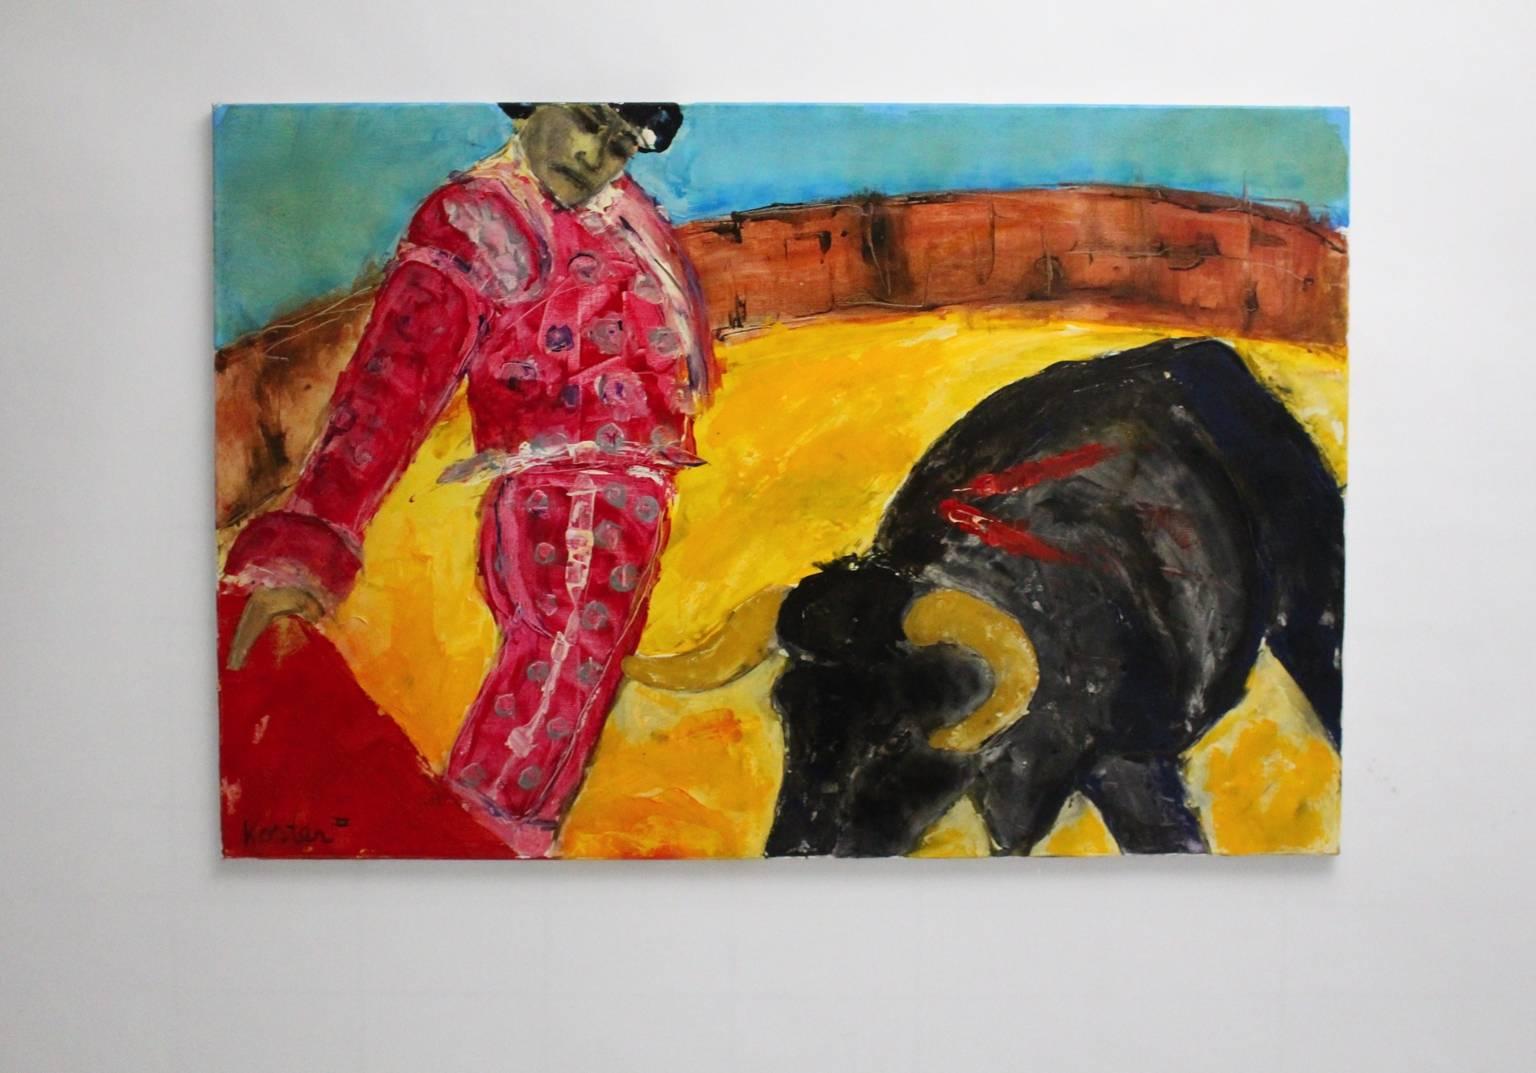 Modern multicolored oil painting from the 1980s by Koster.
The motif shows a Spain torero and a bull in the arena.
very good condition
approx. measures:
Width 150 cm
Height 100 cm
Depth 2.5 cm